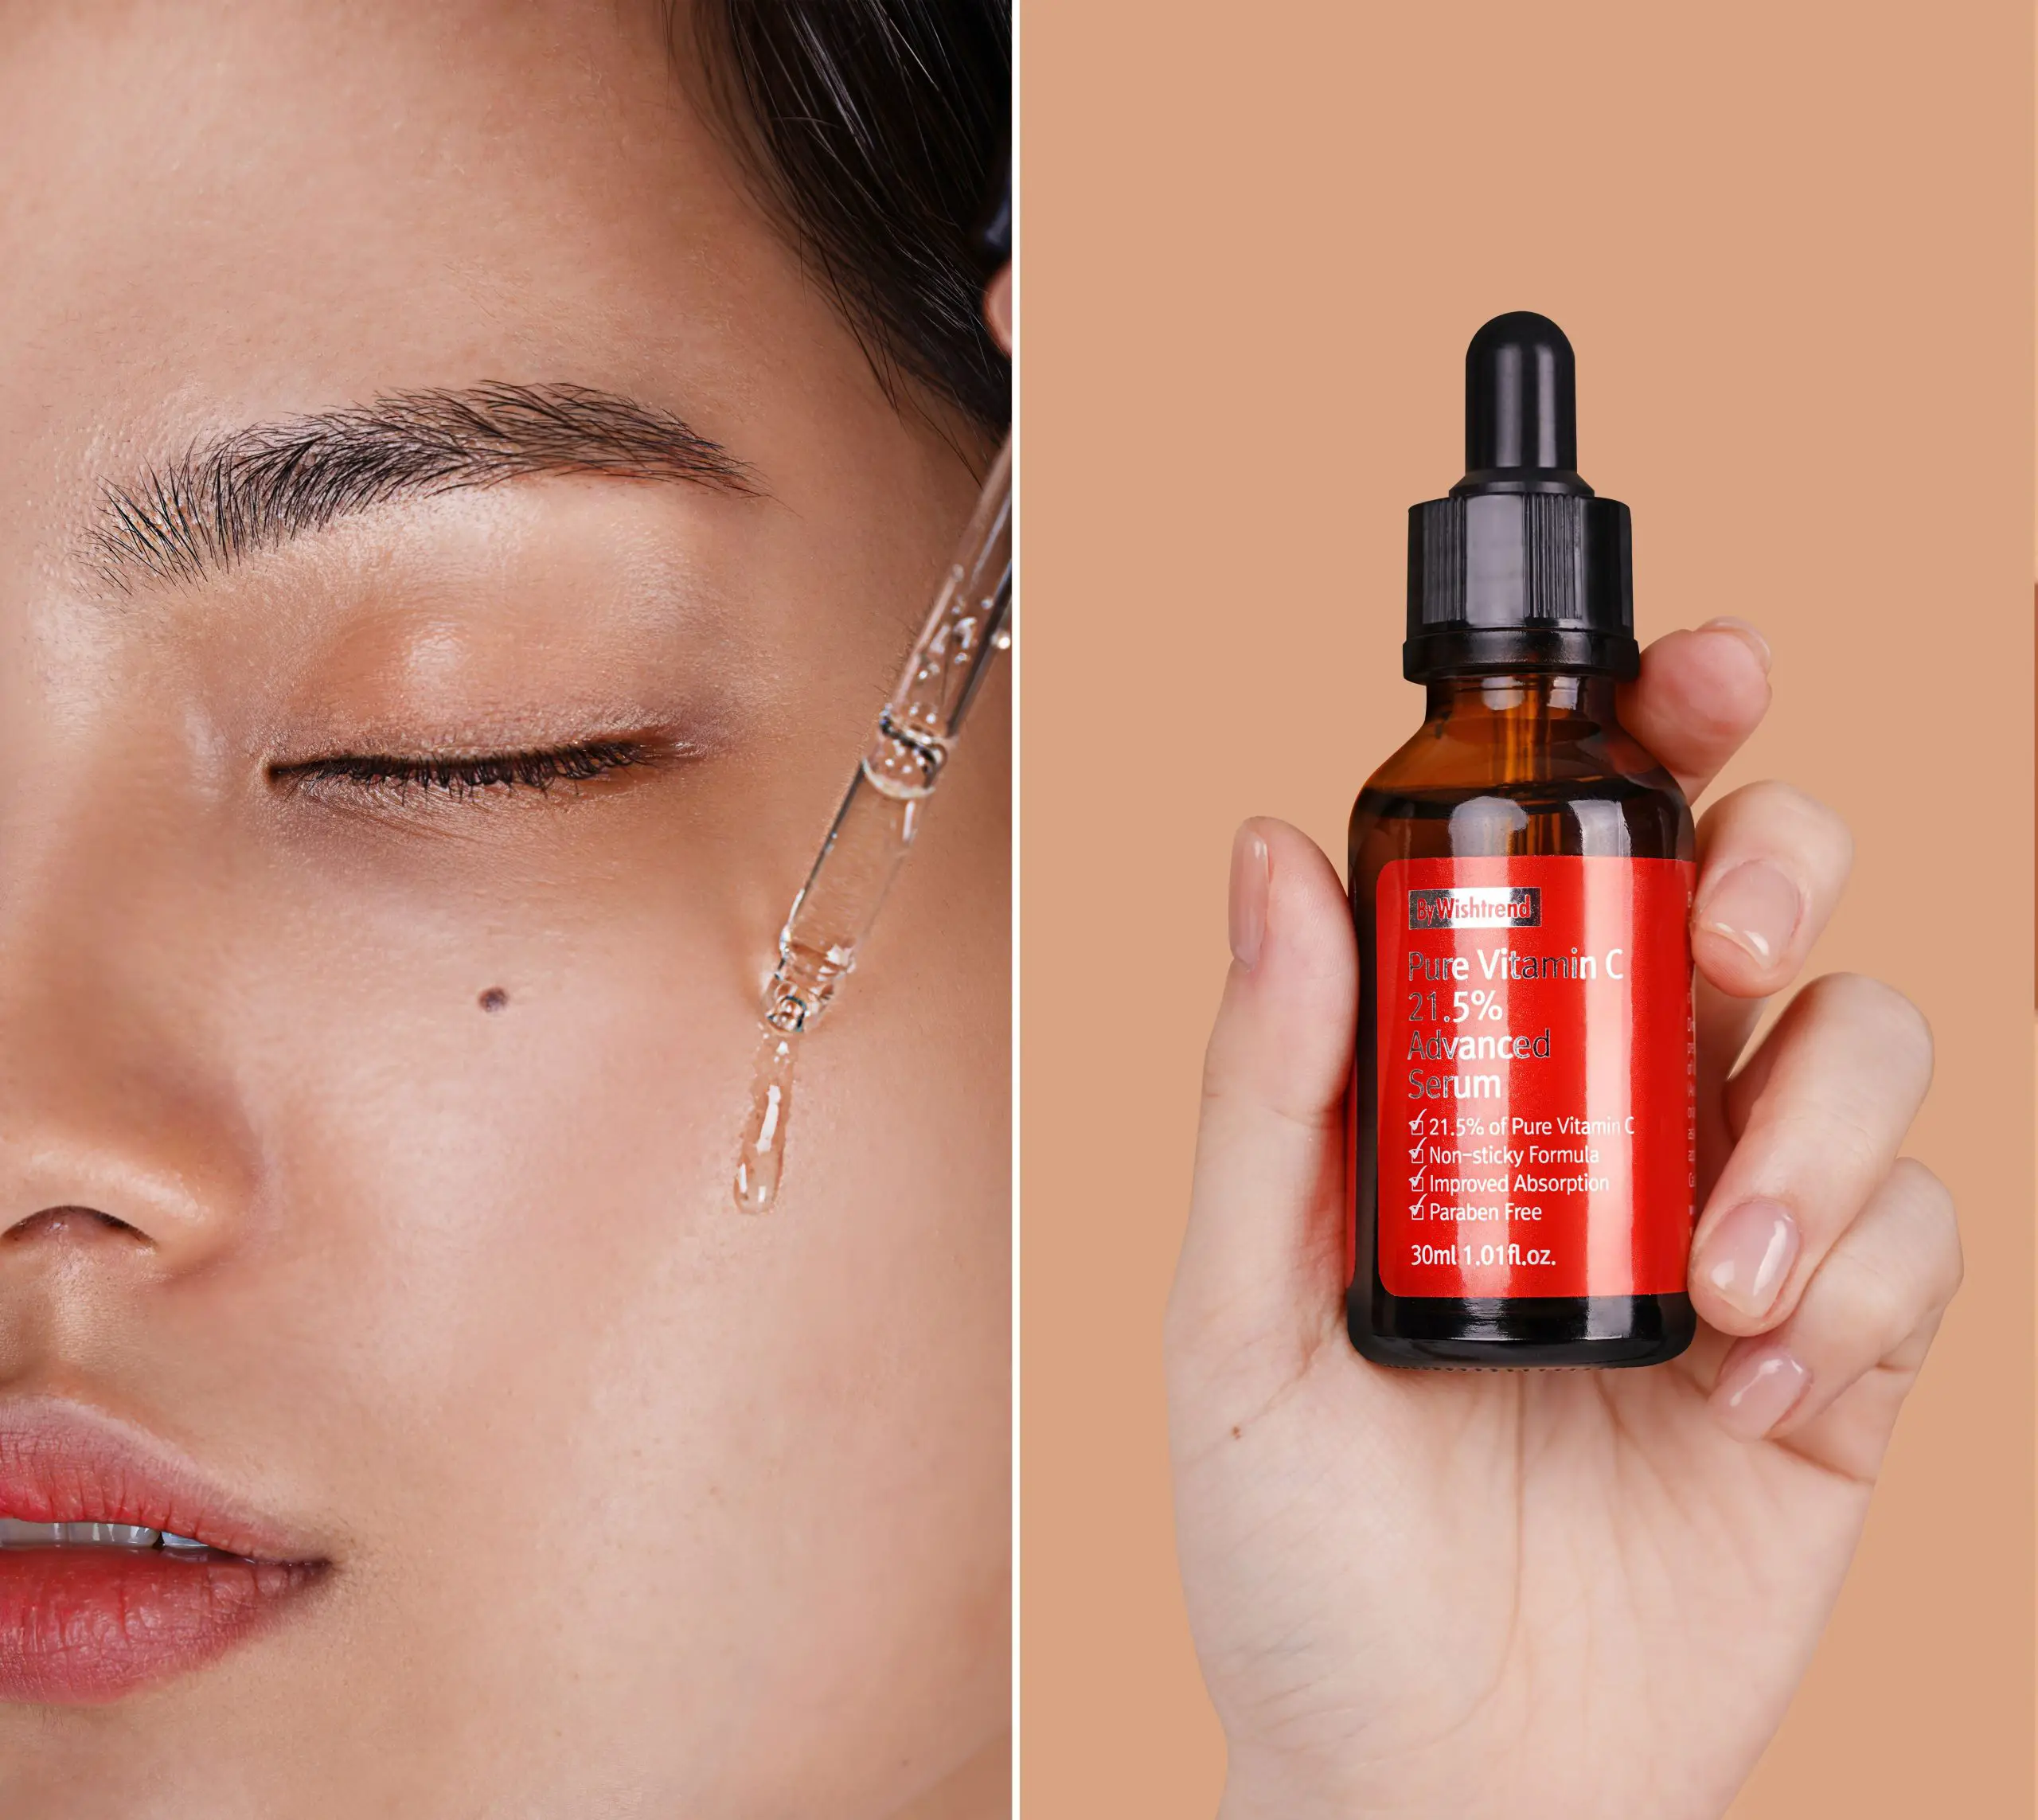 Why You Need Vitamin C Serum in Your Routine